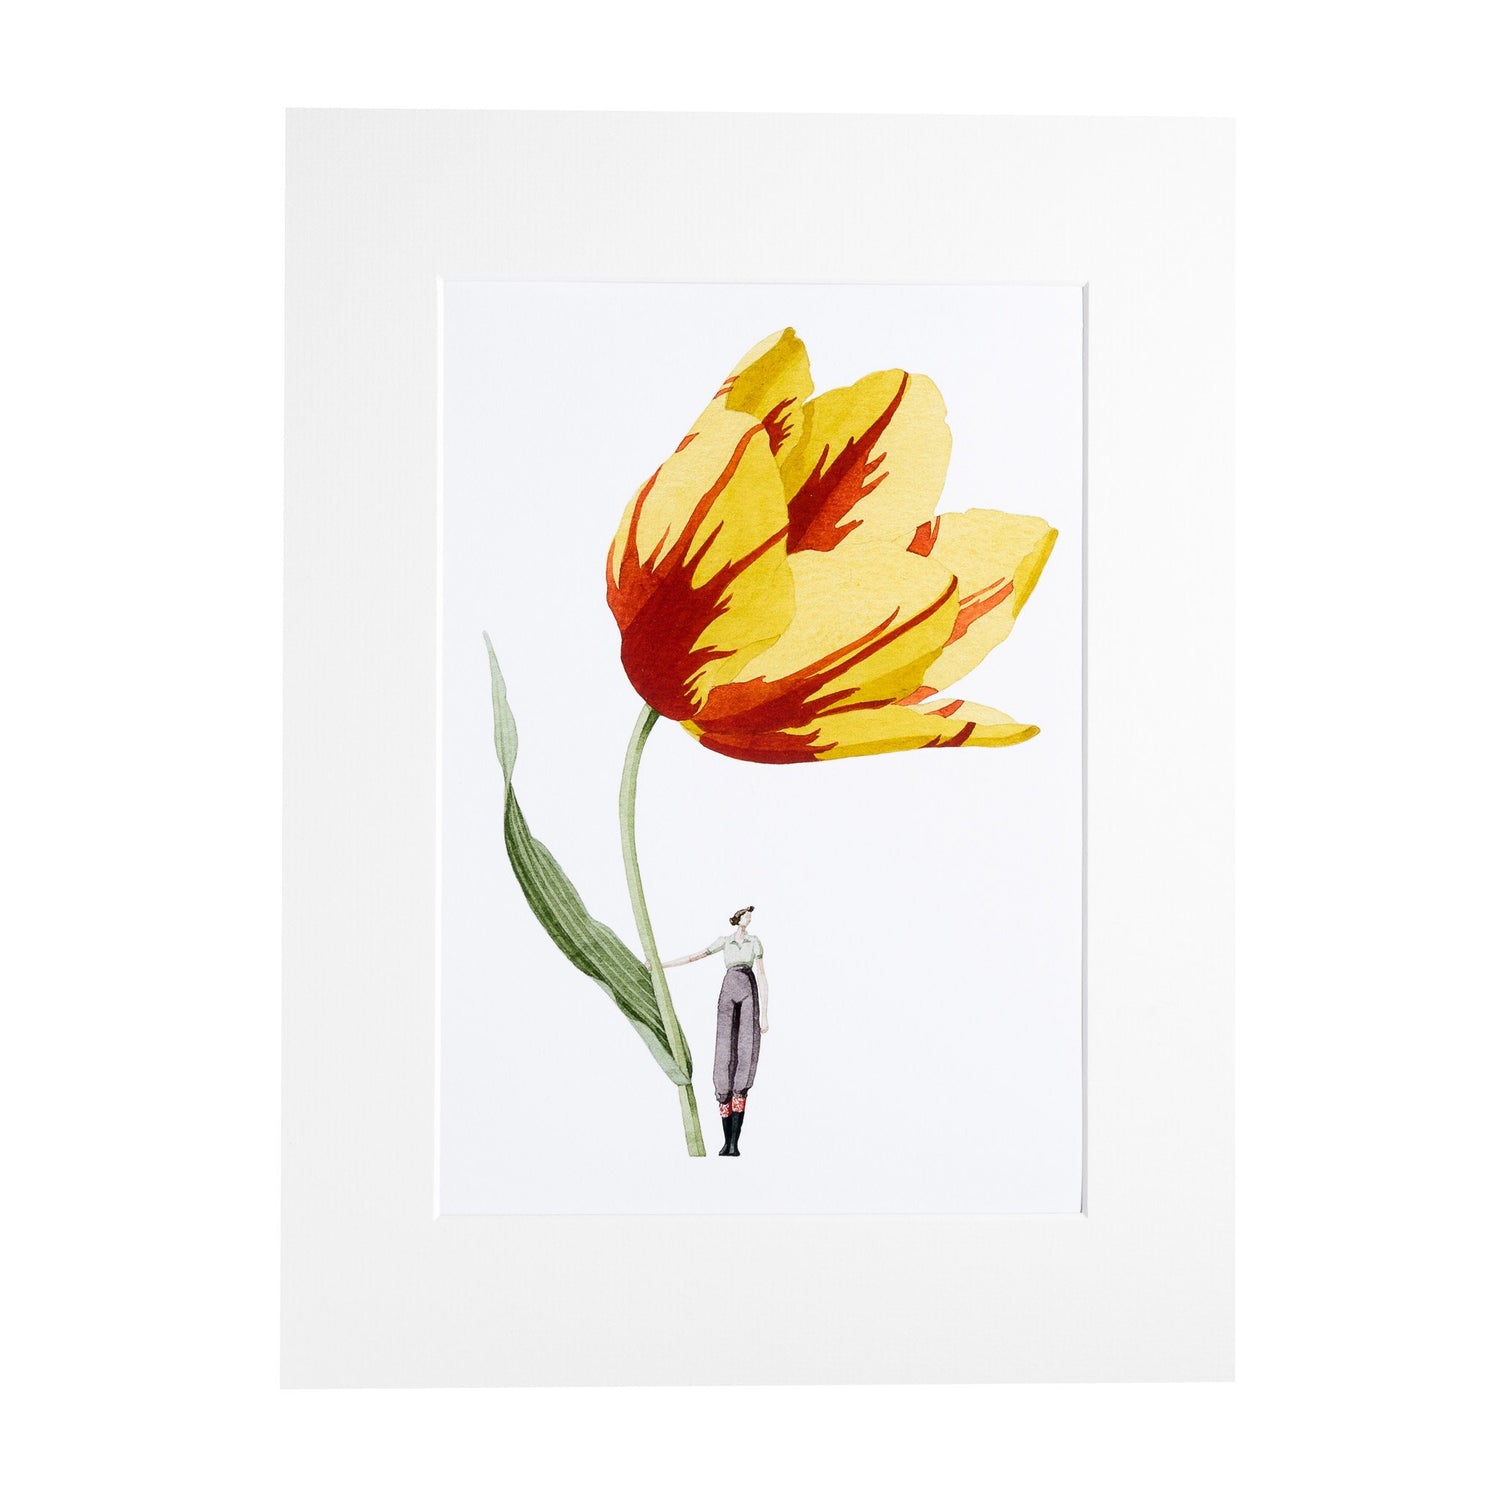 giclee print, mounted print, print, tulip, illustration, made in england, flowers, archival paper, art print